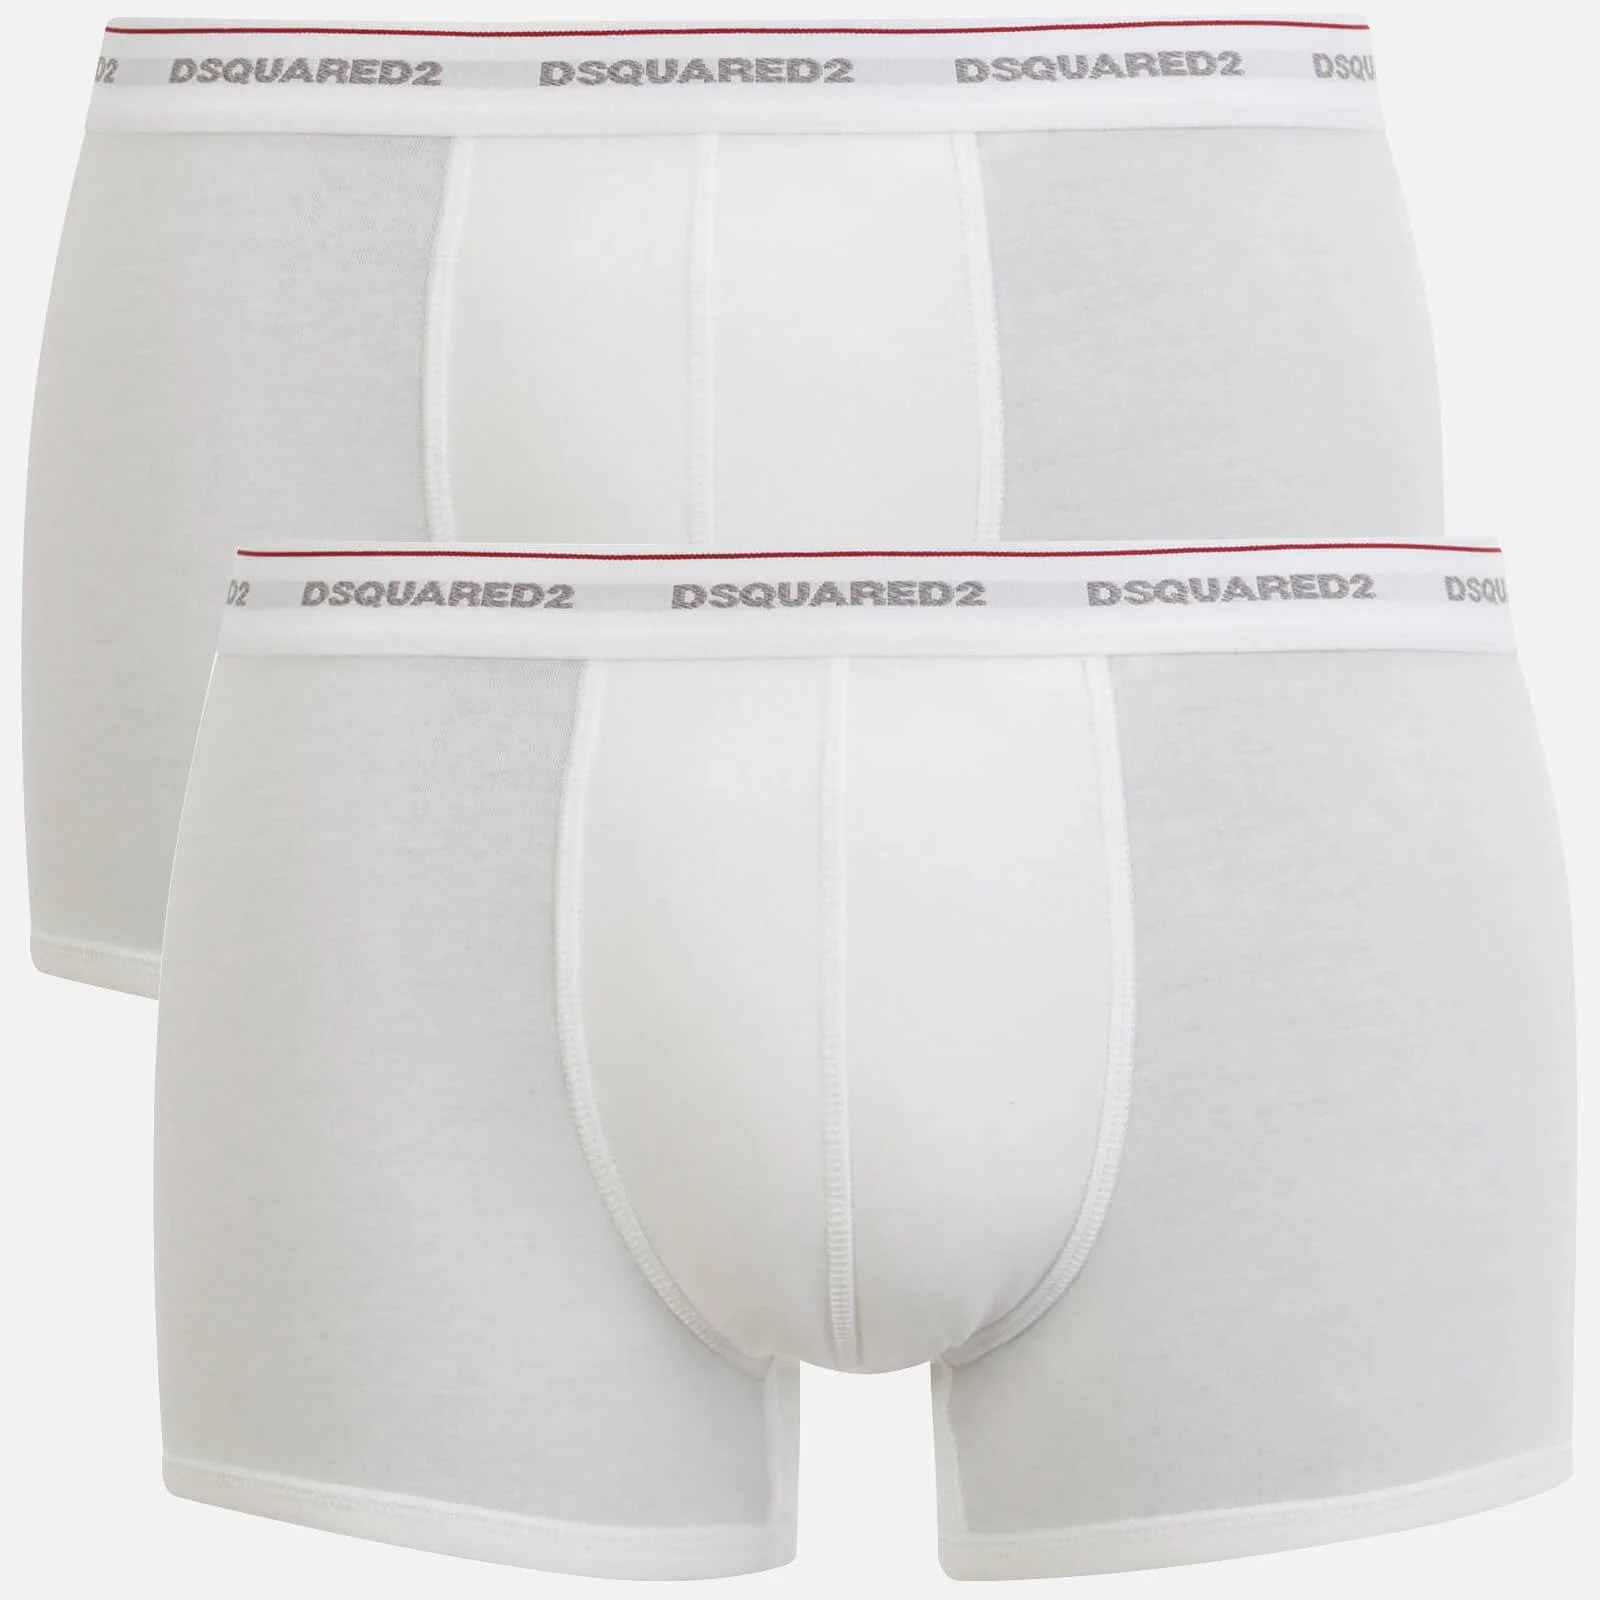 Dsquared2 Men's Jersey Cotton Stretch Trunk Twin Pack Boxers - White Image 1